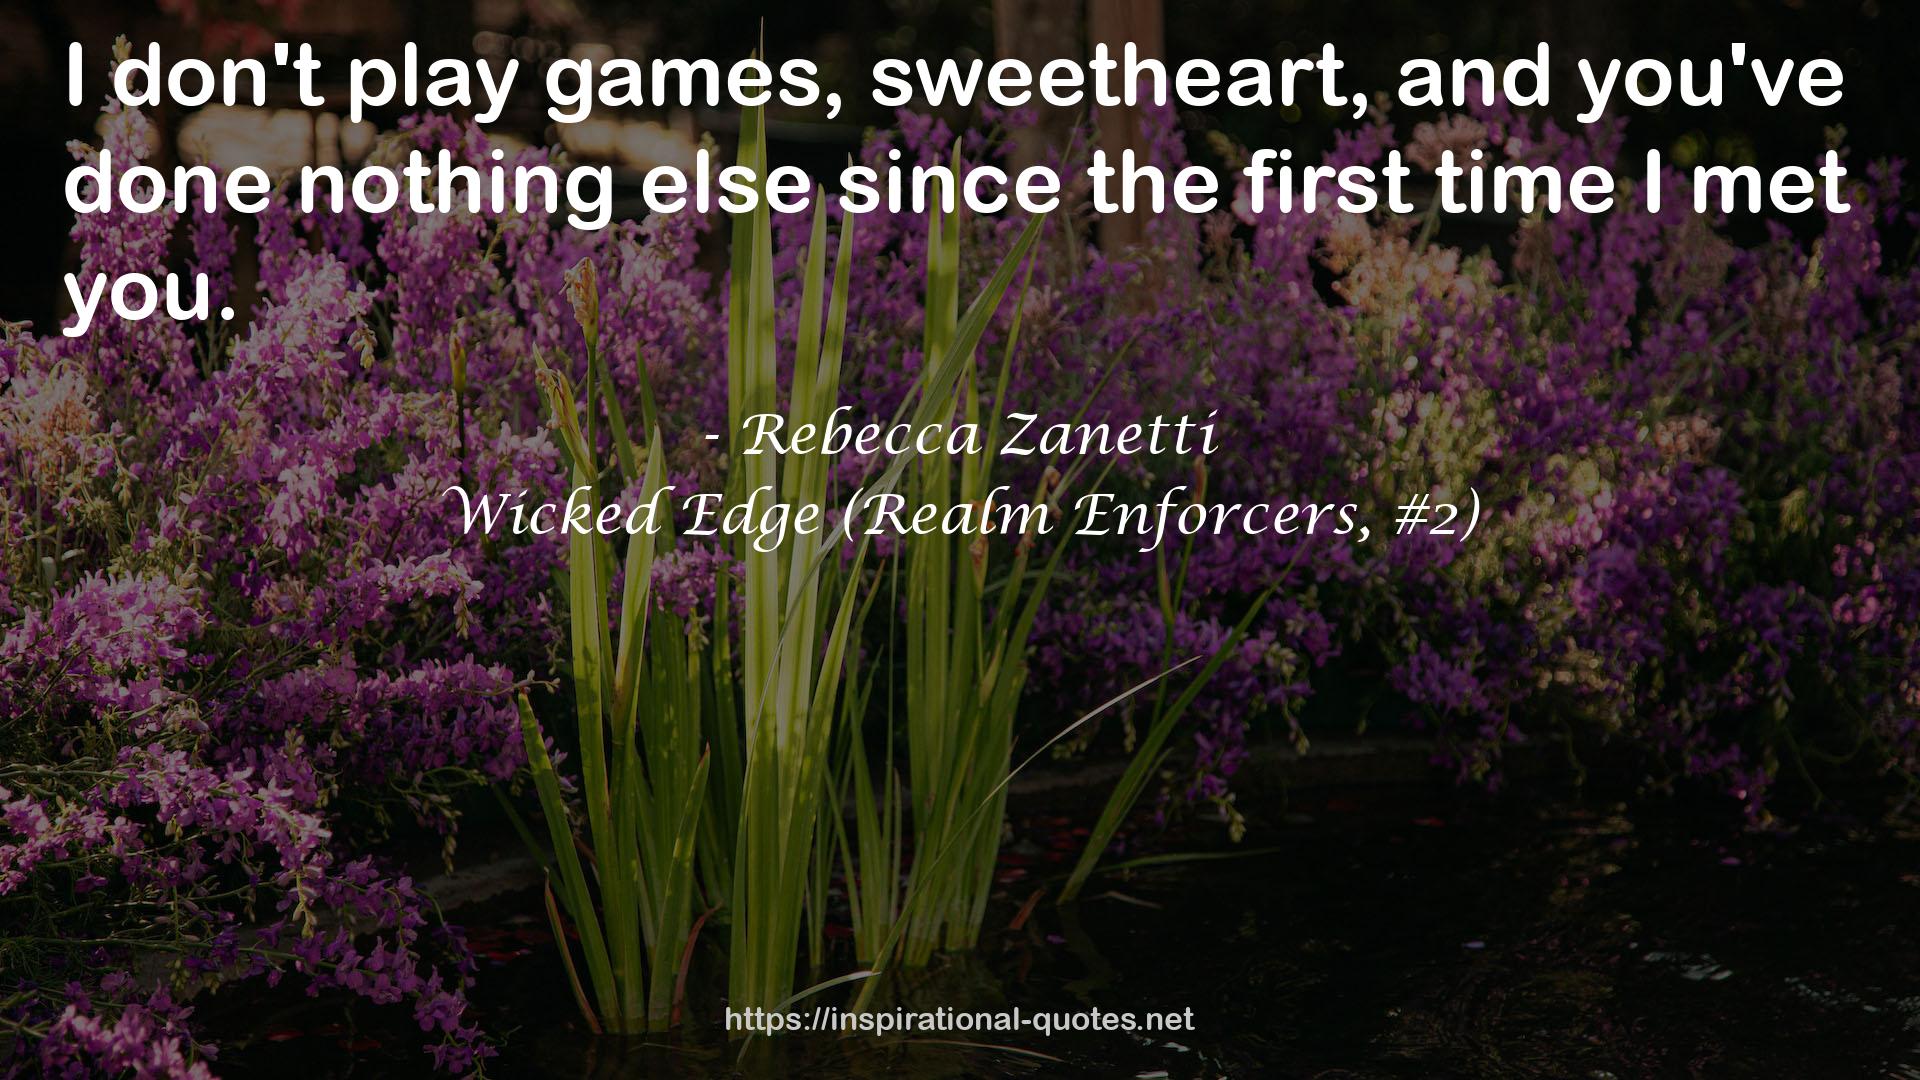 Wicked Edge (Realm Enforcers, #2) QUOTES